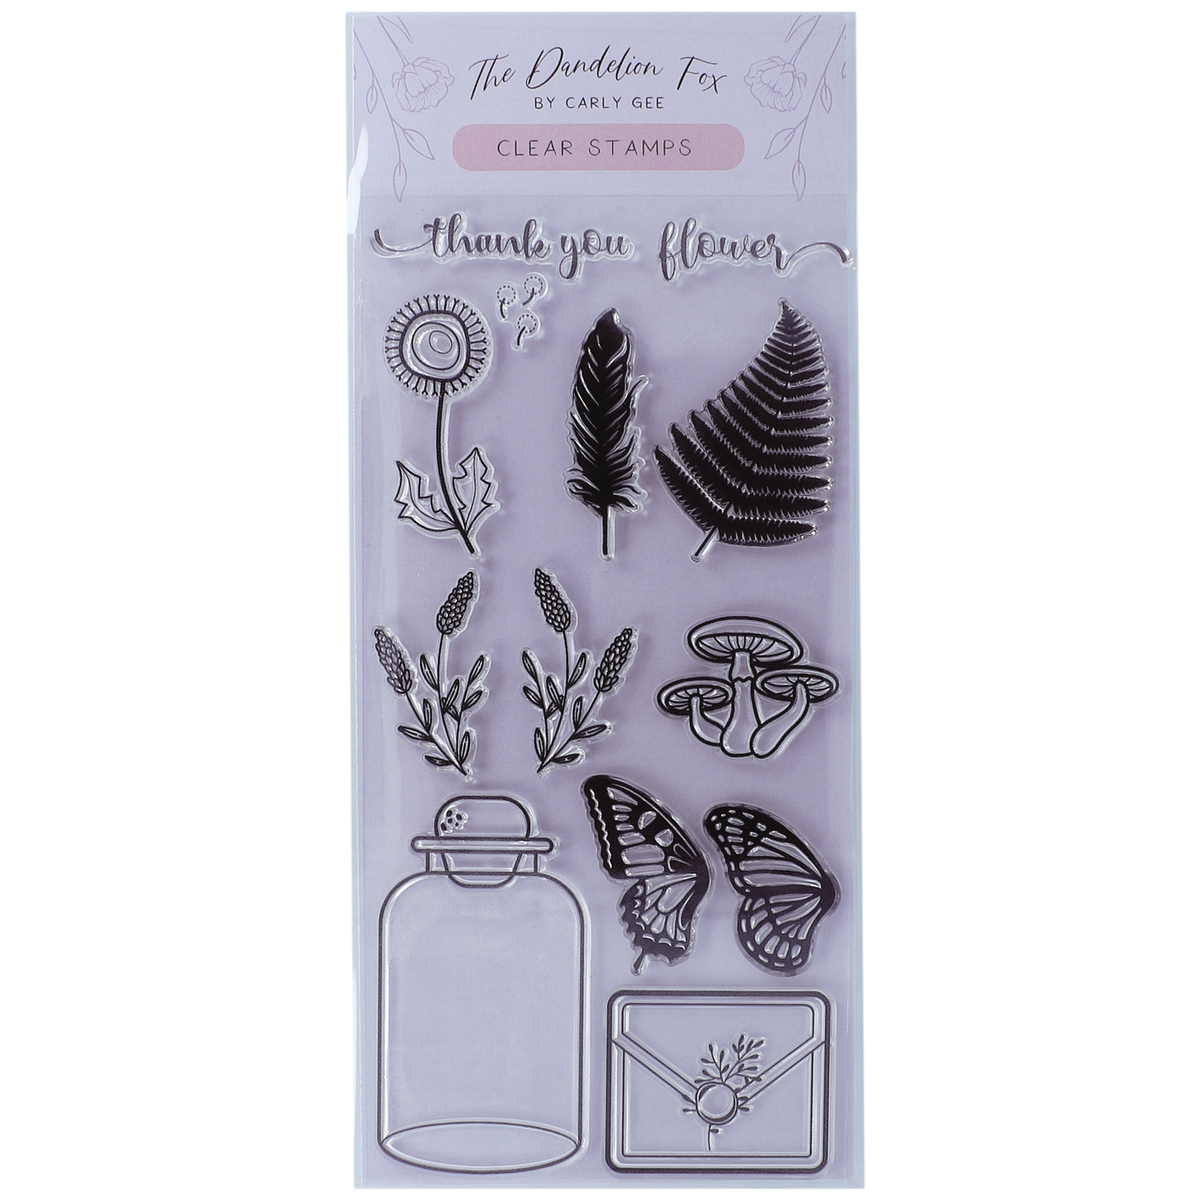 Into the Flower Press by The Dandelion Fox Art - RubberStamps.com